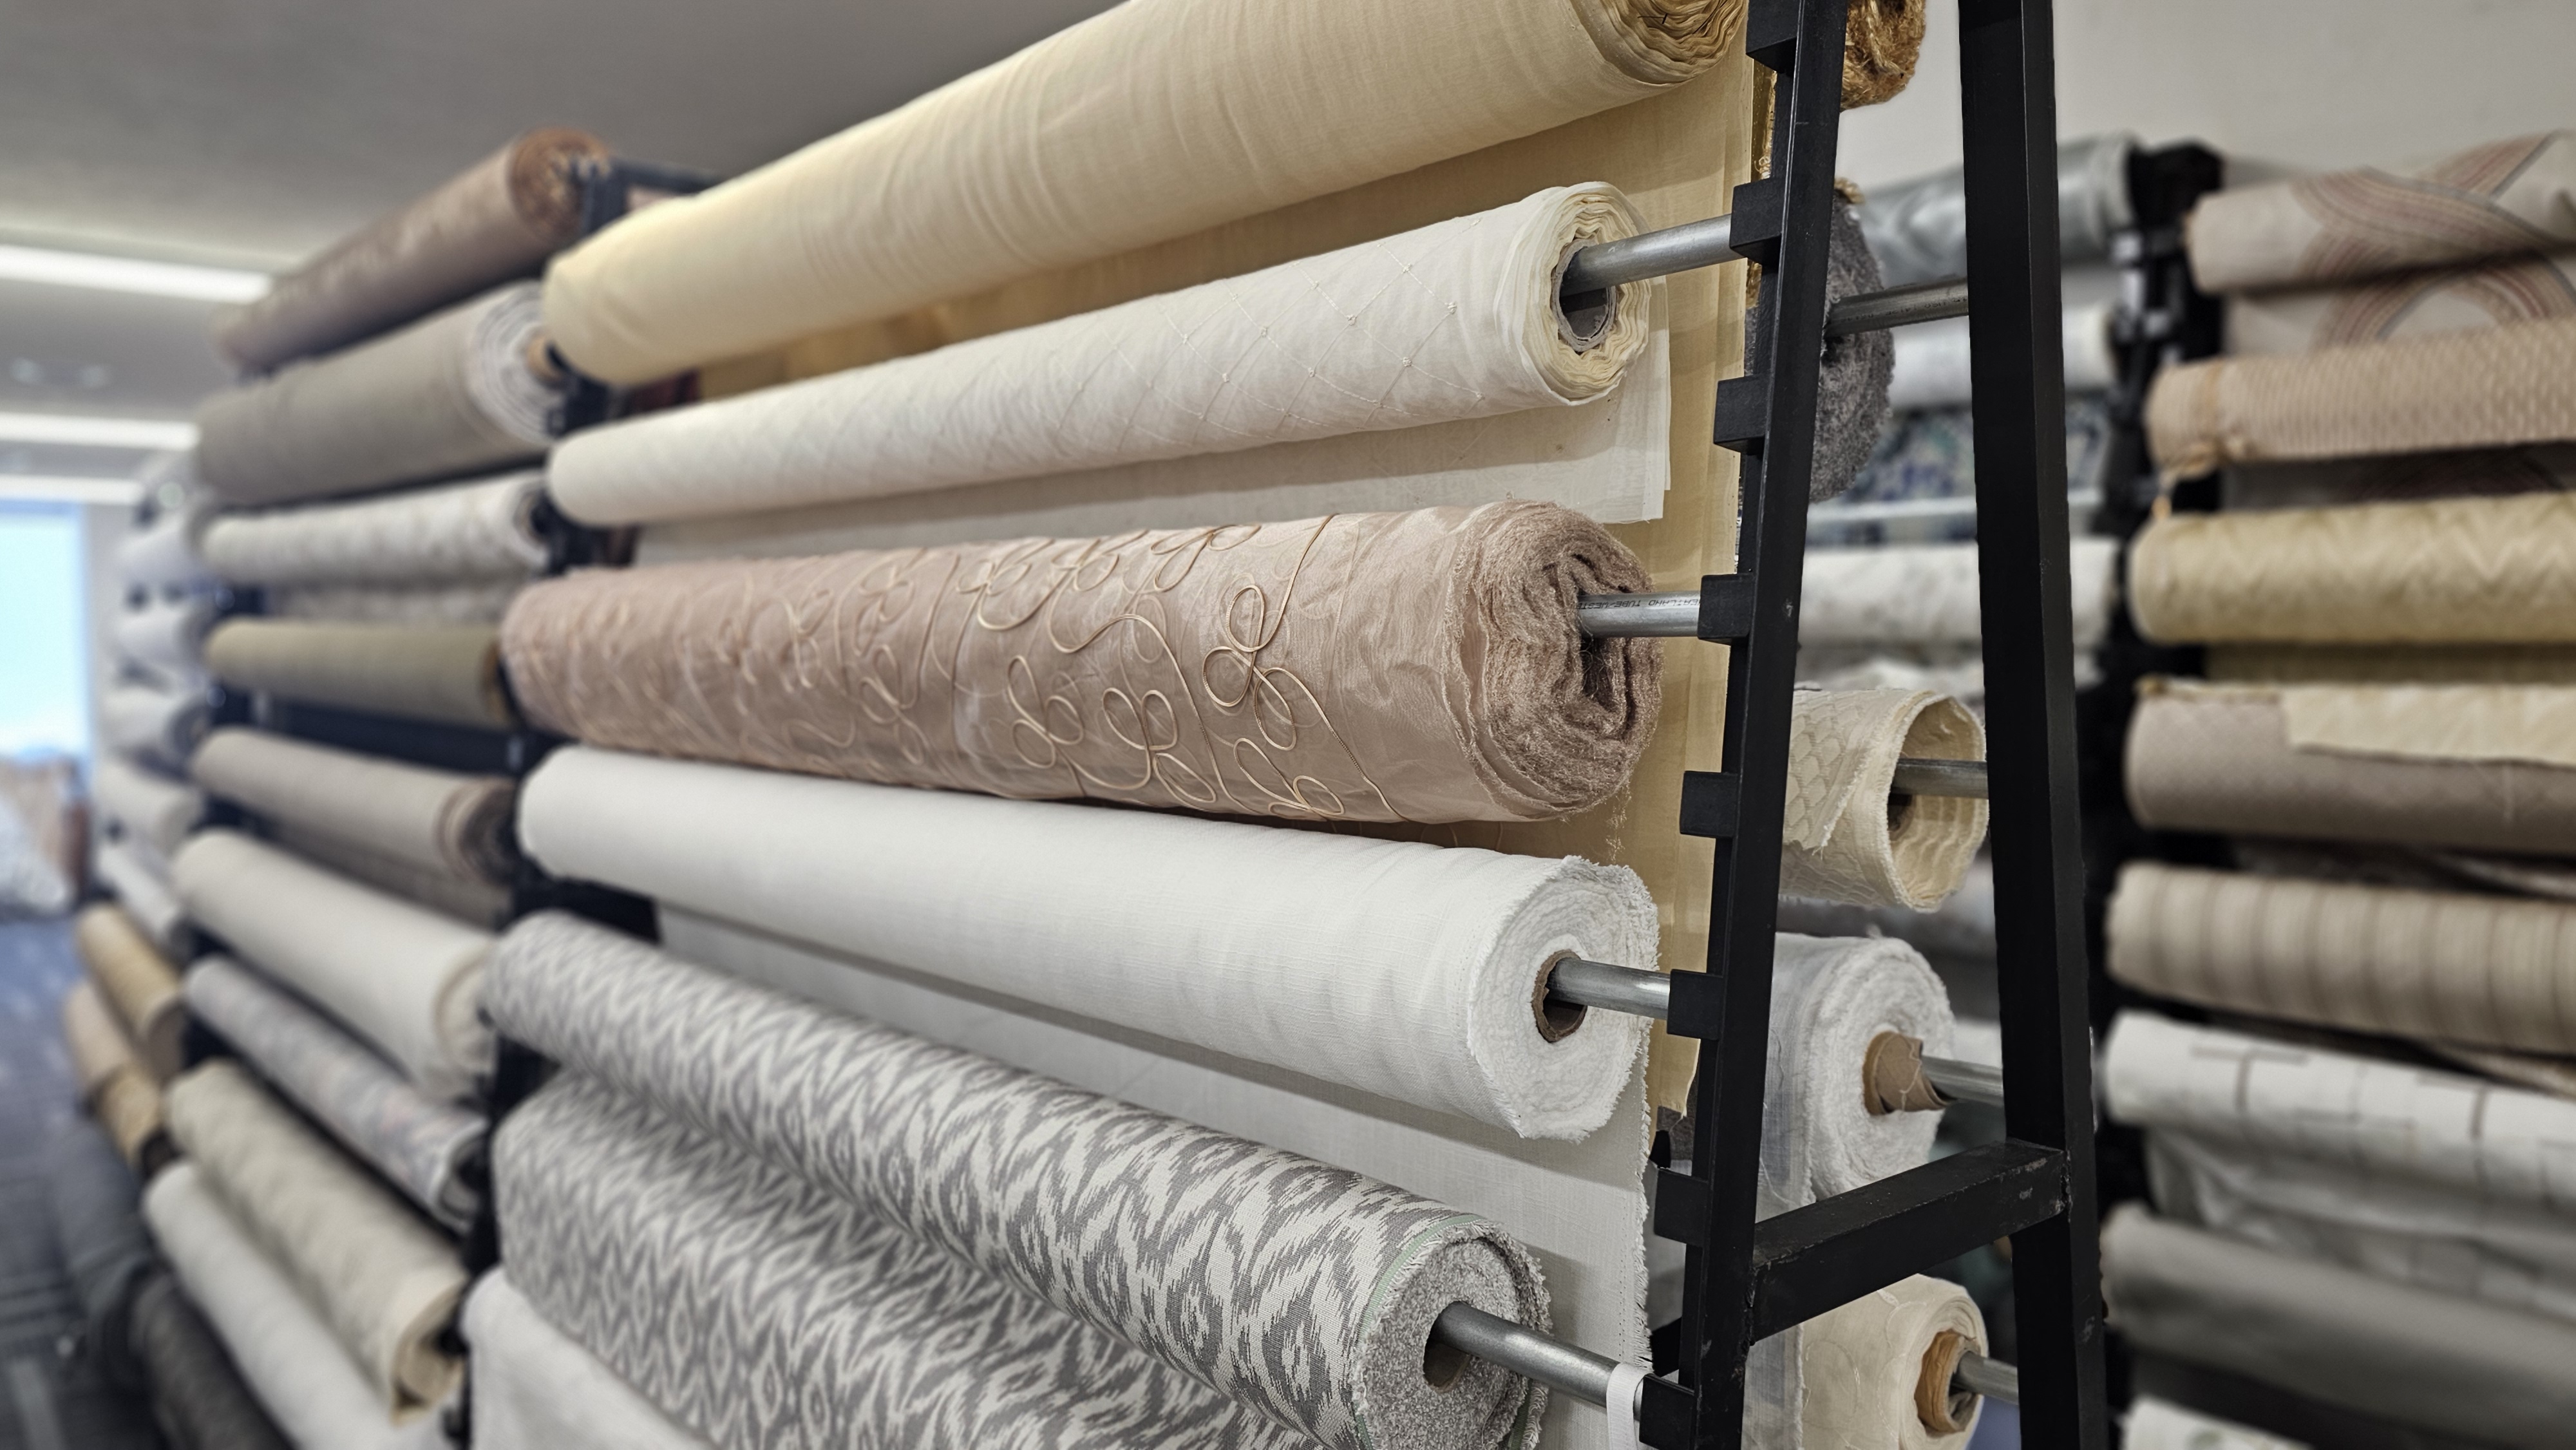 Did You Know We Have In Stock Fabrics In Our Dormont Showroom?